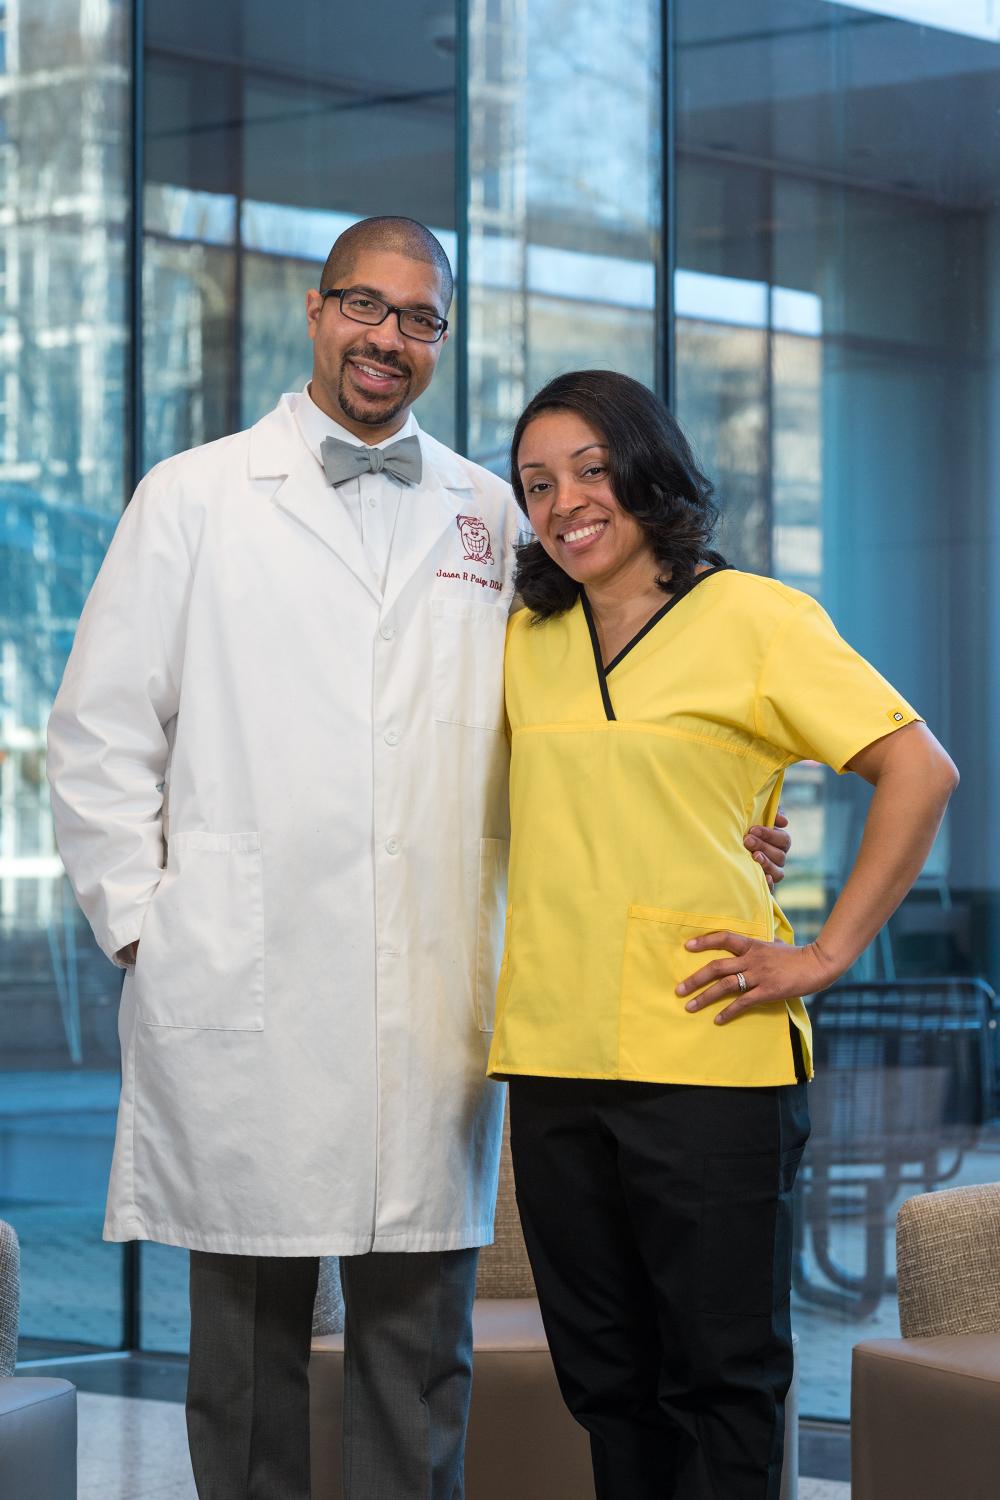 Jason and Jamelle Paige have made gifts to both the School of Dentistry and the College of Health Professions